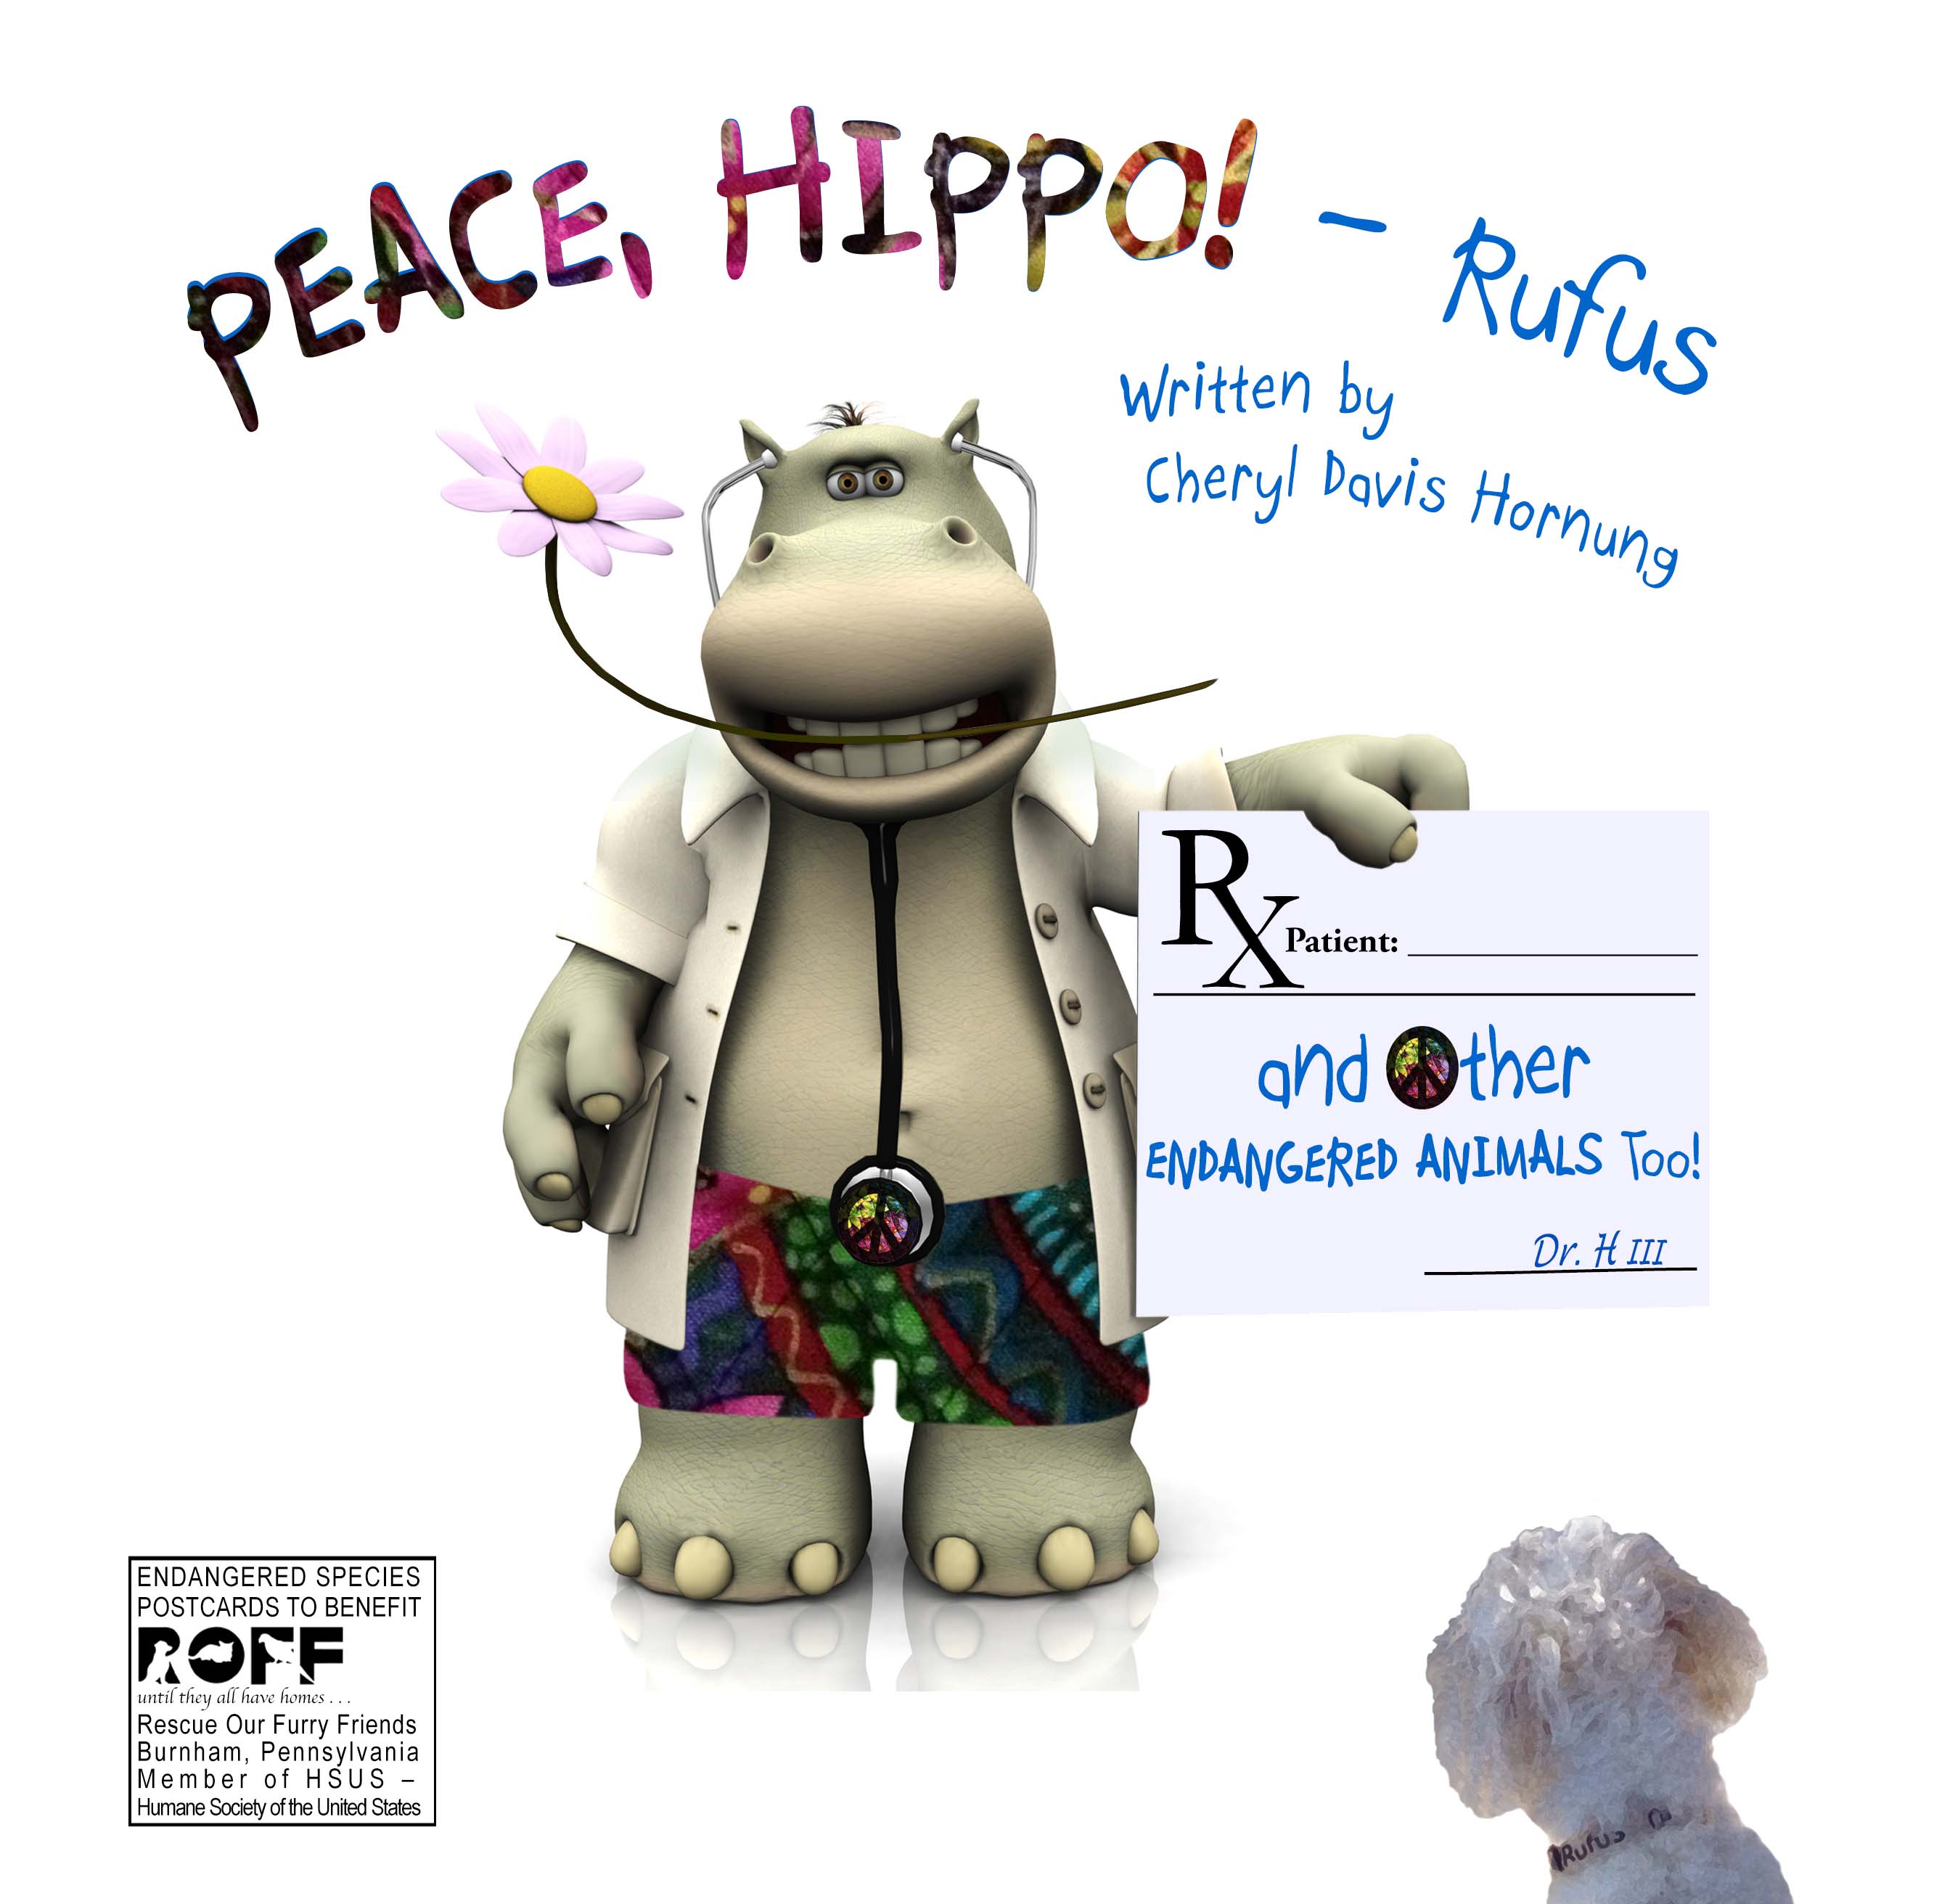 PEACE, HIPPO! and Other Endangered Animals Too! by Cheryl Davis Hornung available at Amazon and CreateSpace.